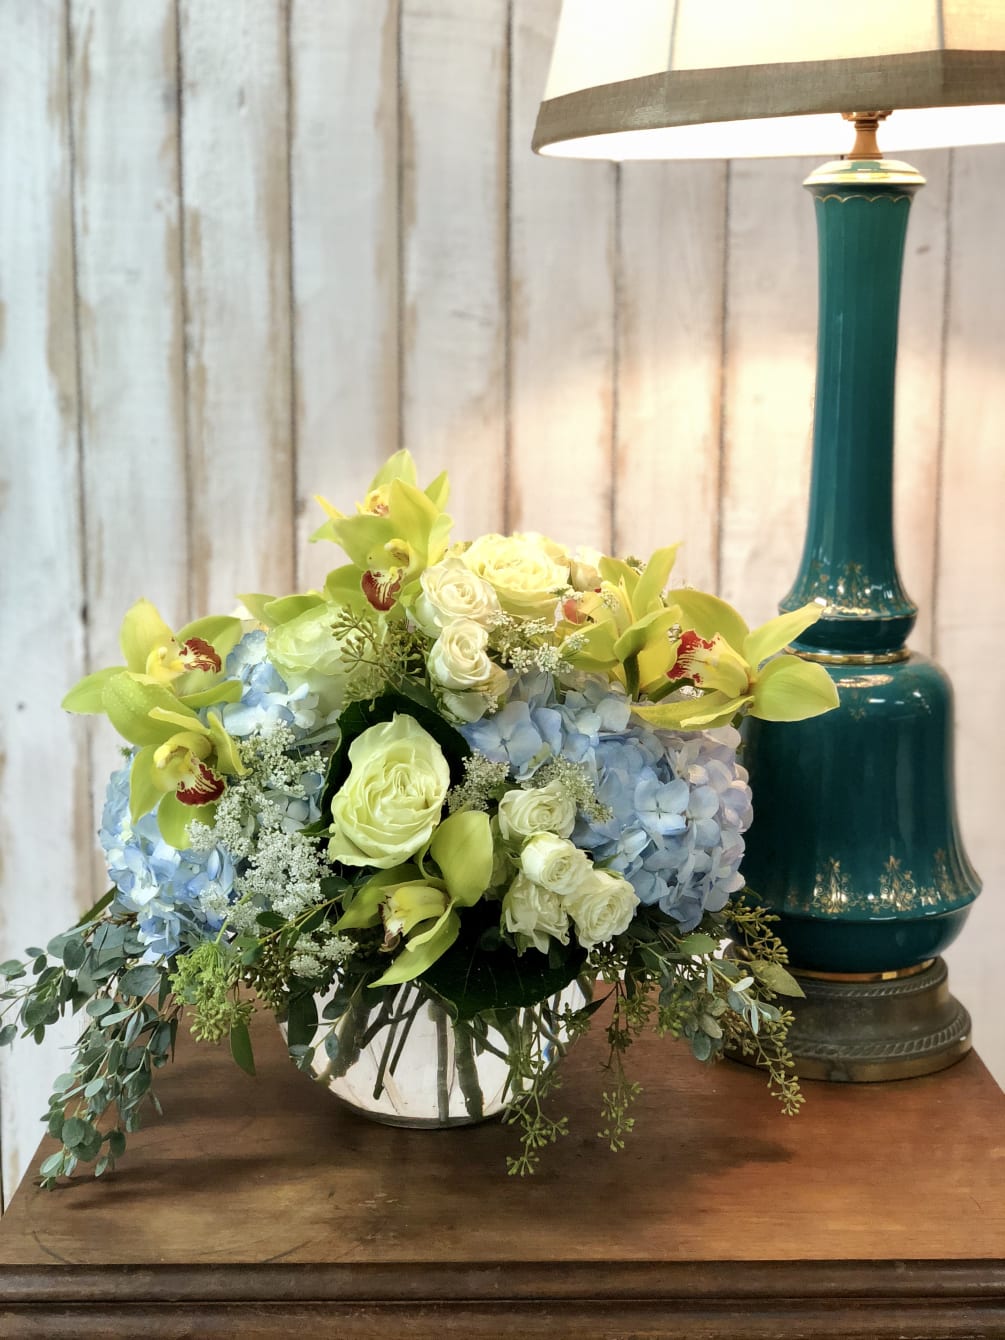 Bountiful Orchids includes a lovely mix of blue hydrangea, green cymbidium orchids